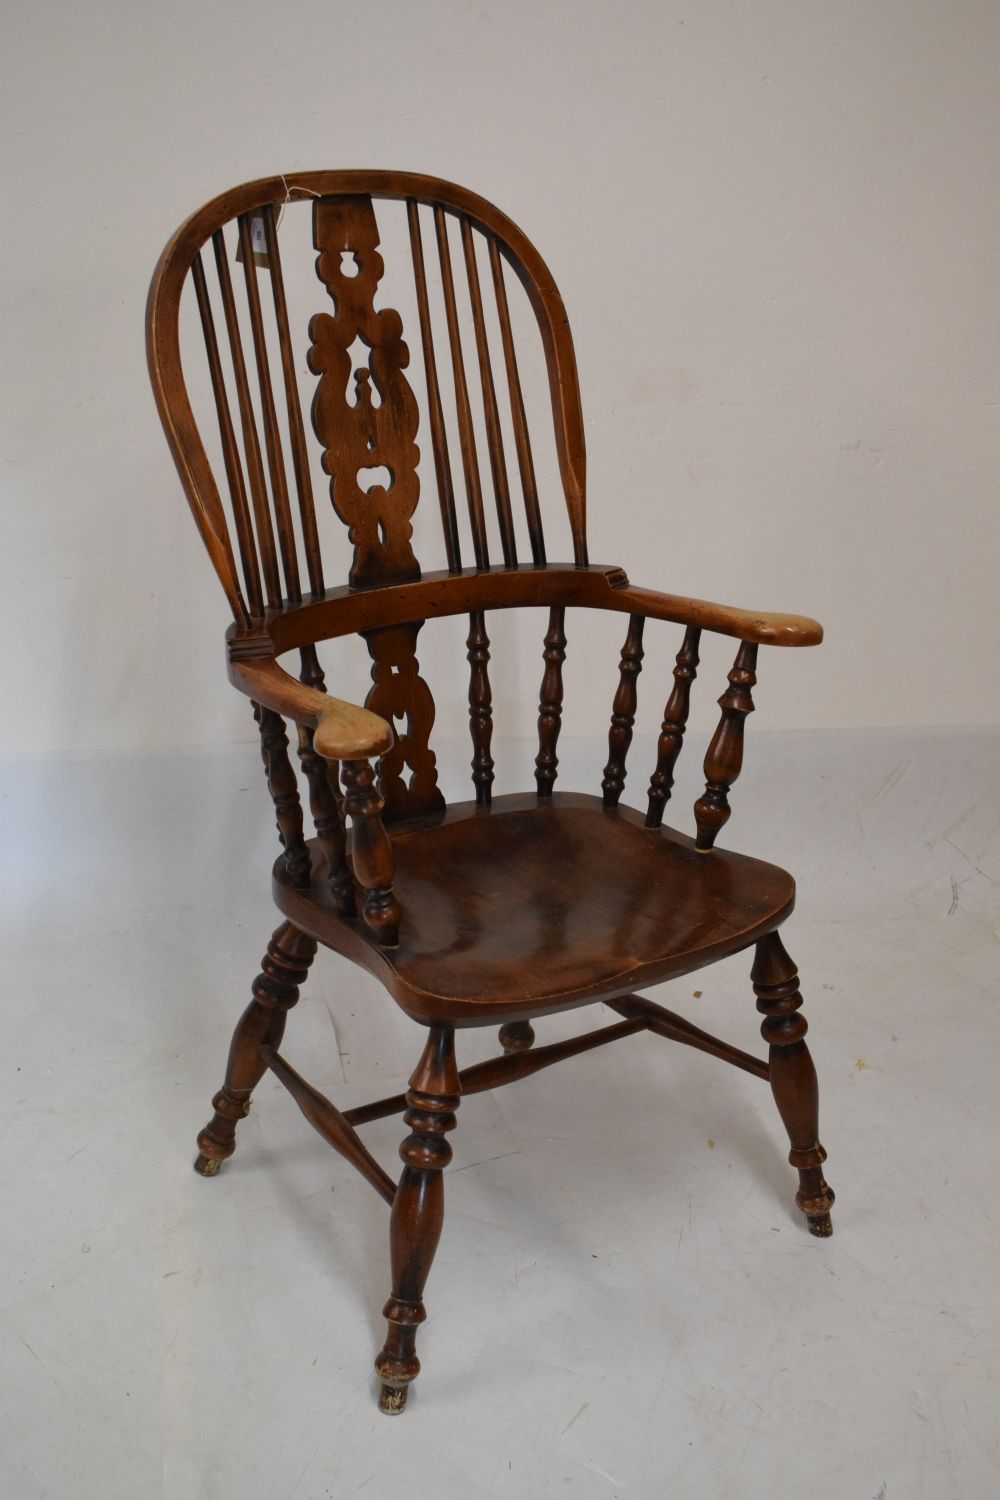 Reproduction elm seat Windsor stickback elbow chair